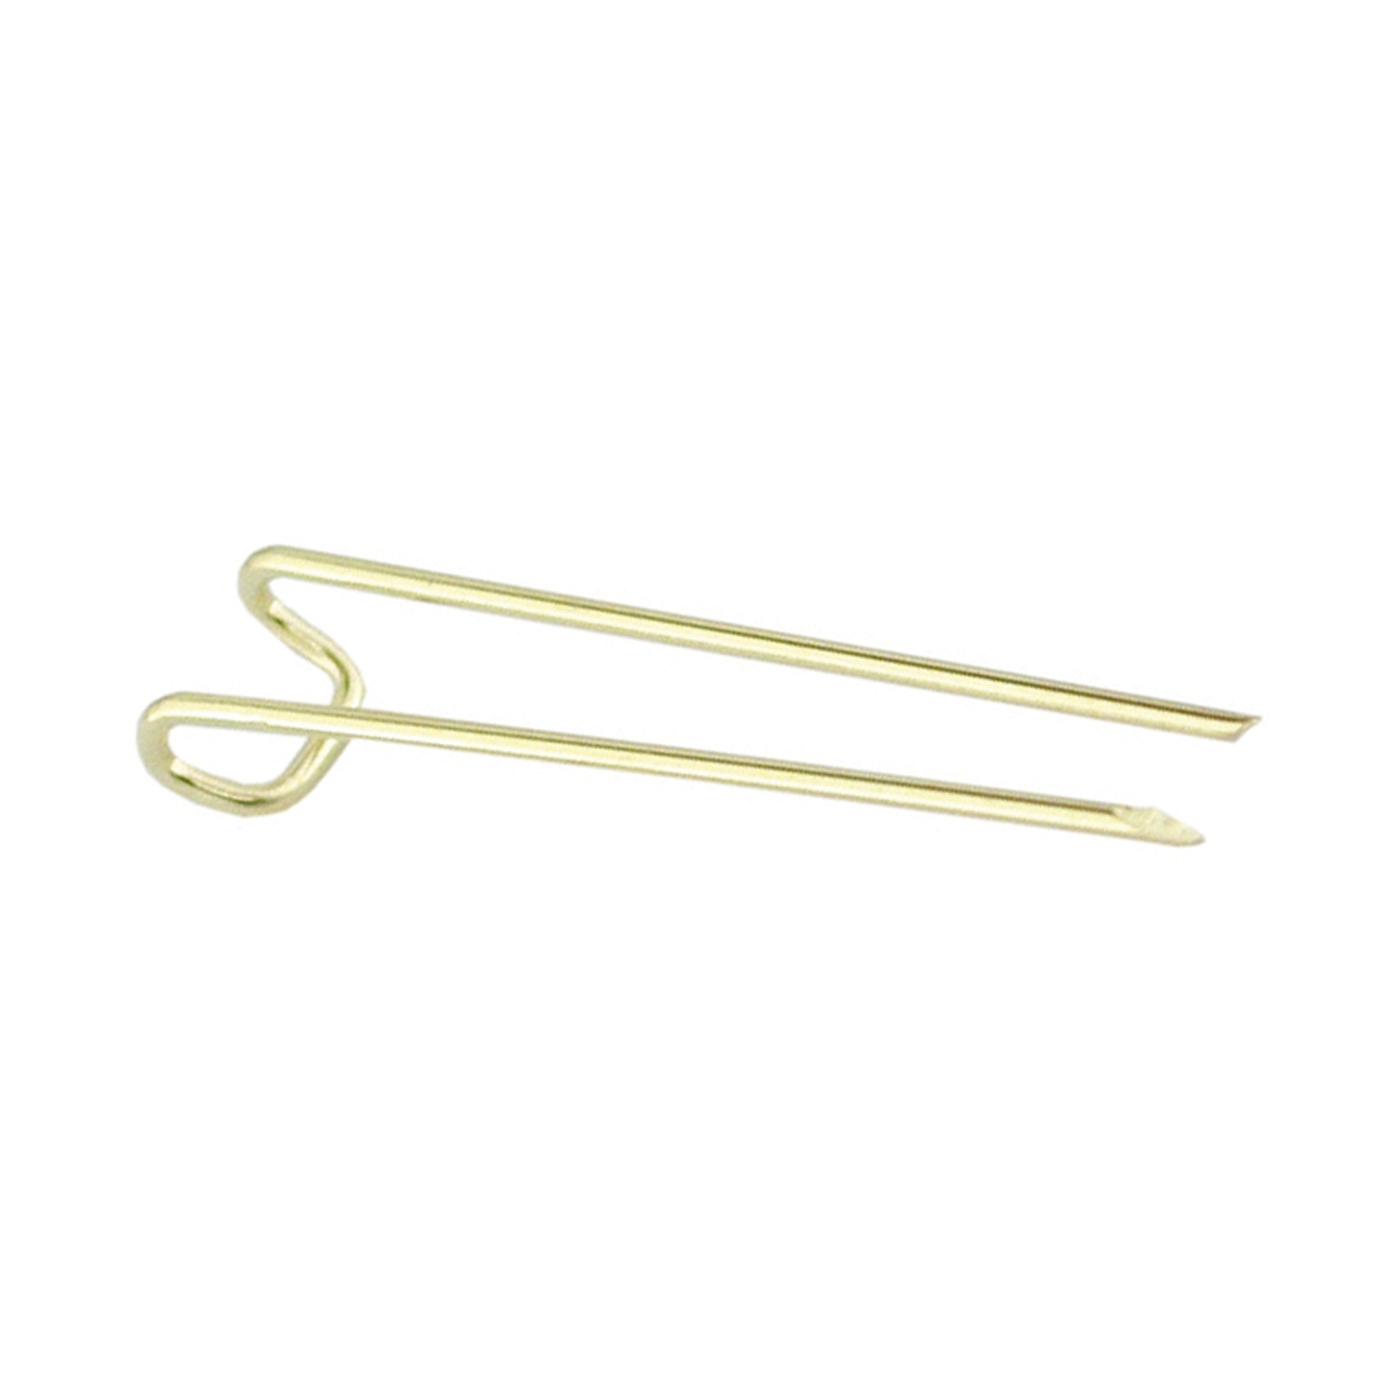 Decoration Needles, Gold-Plated, 24 mm - 100 pieces